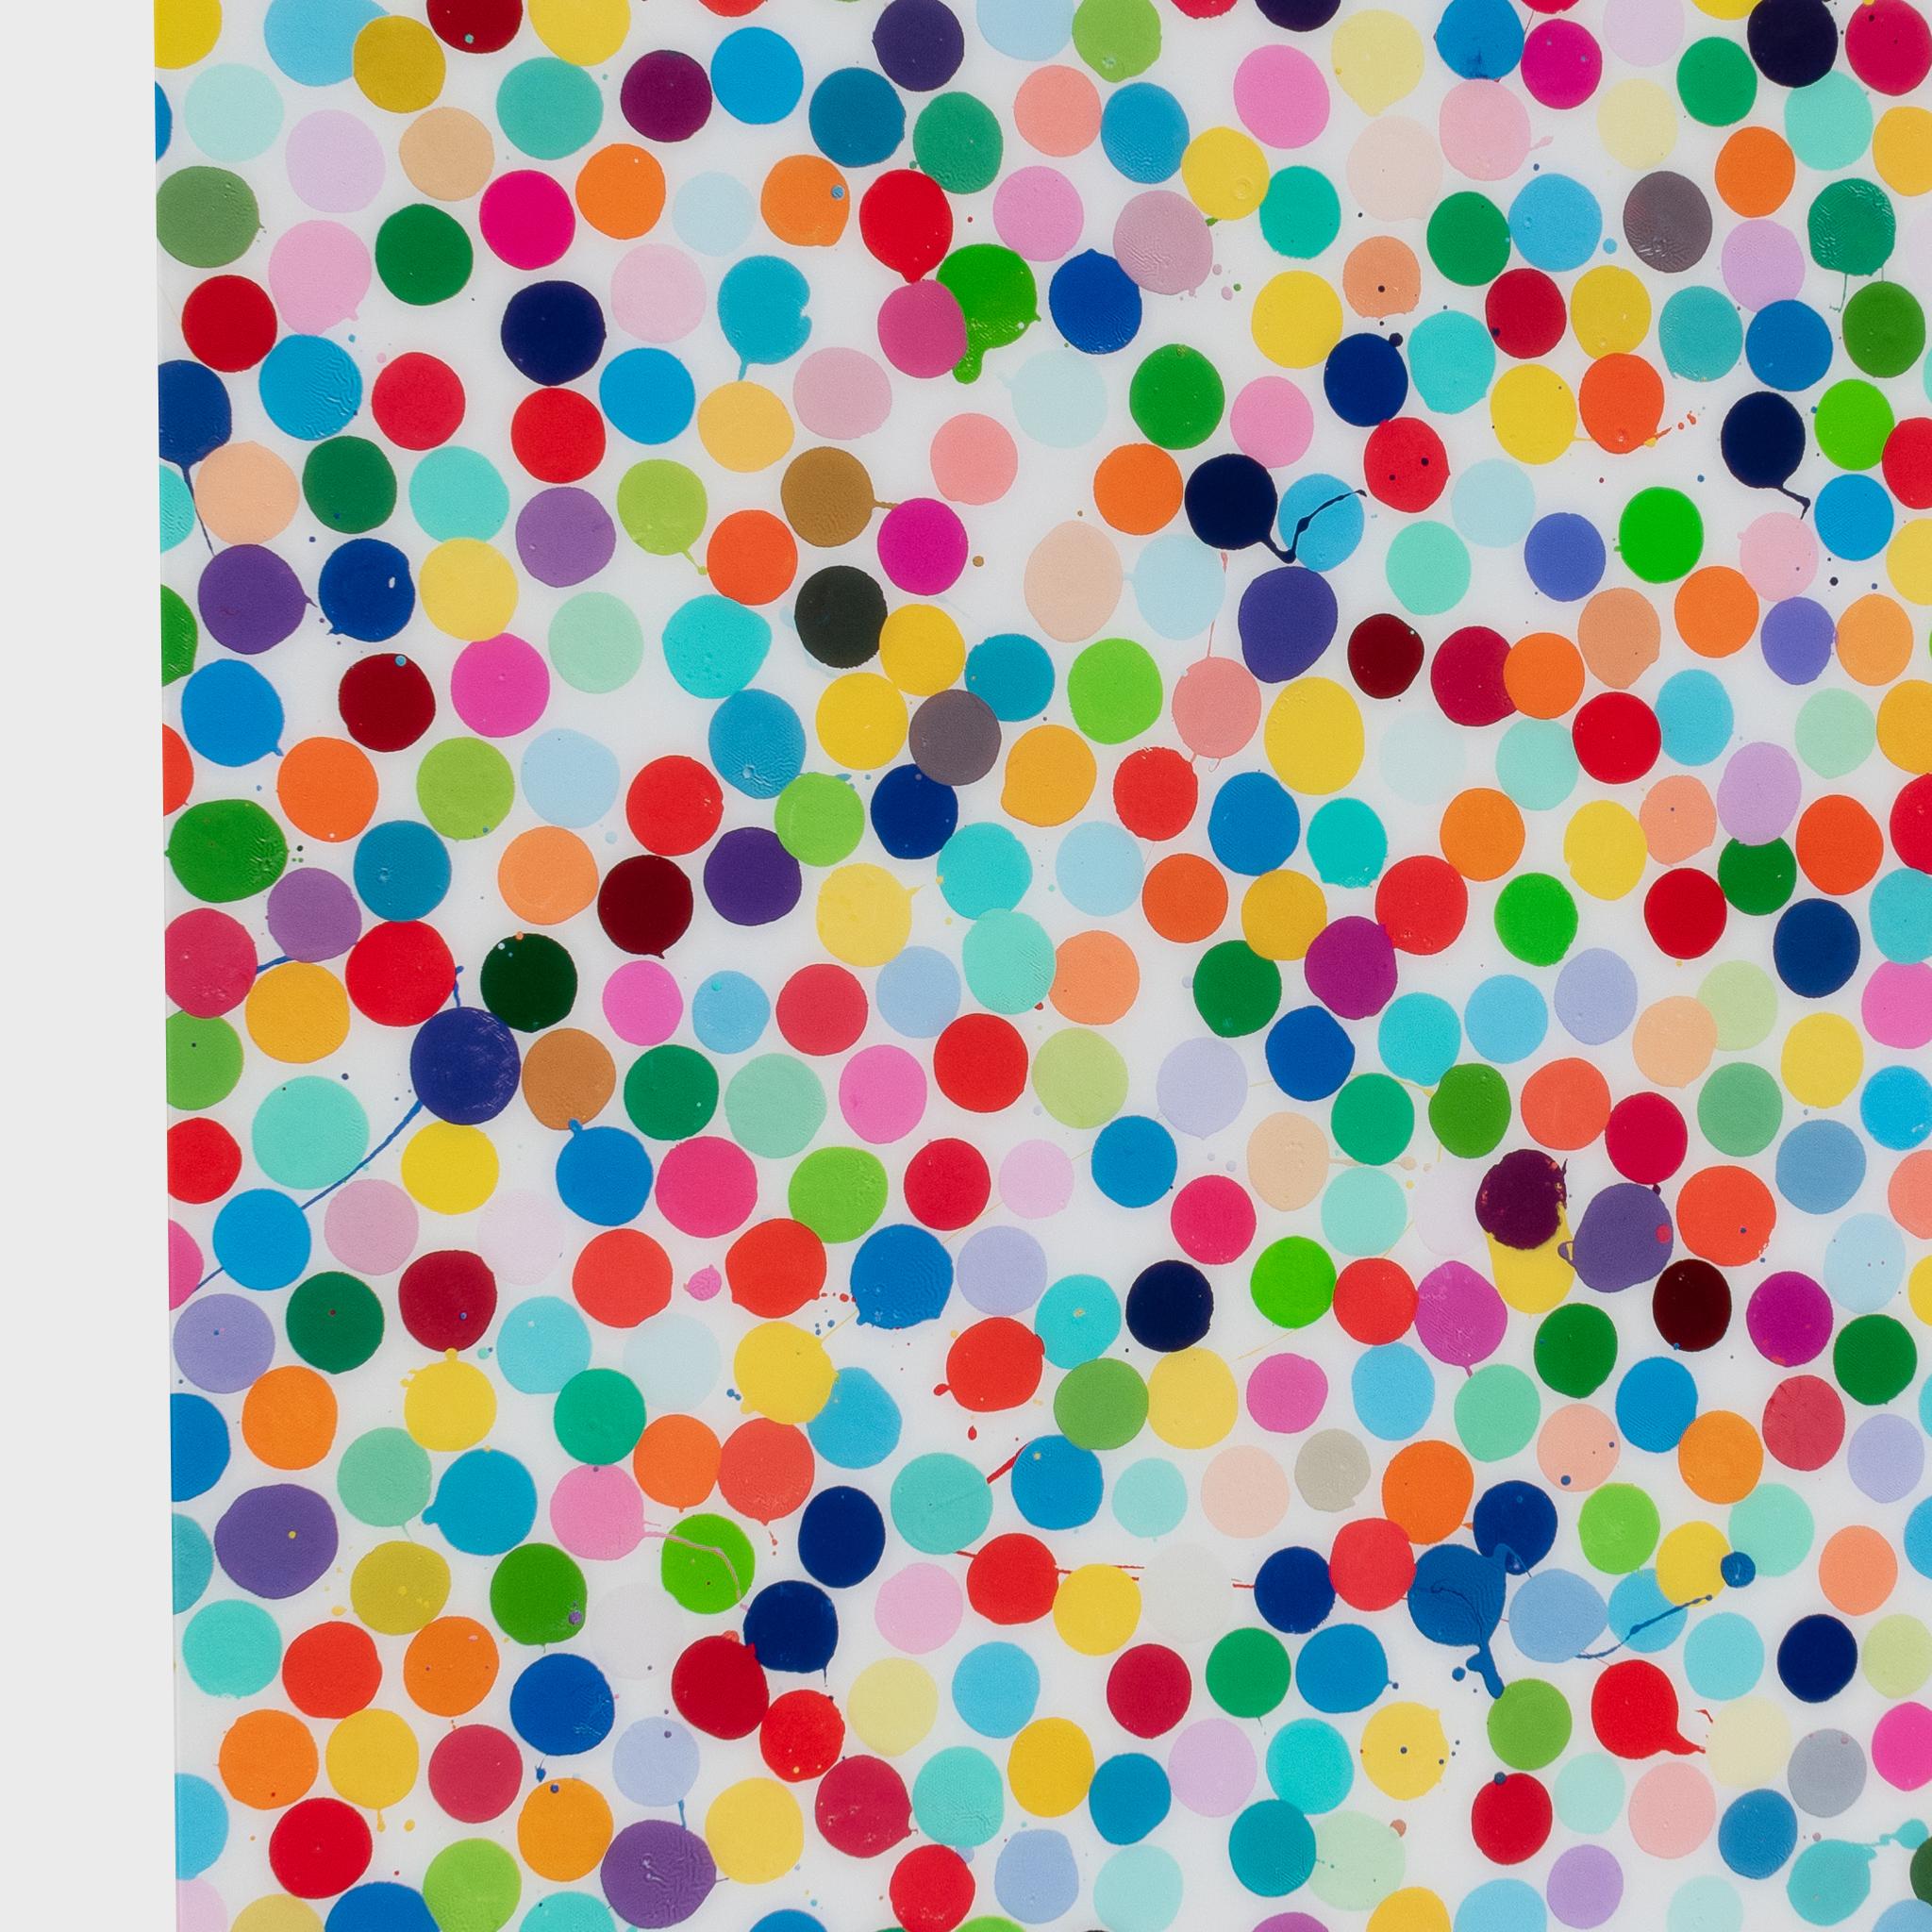 H5-3 Camino Real Damien Hirst Abstract Spot Signed Print For Sale 2